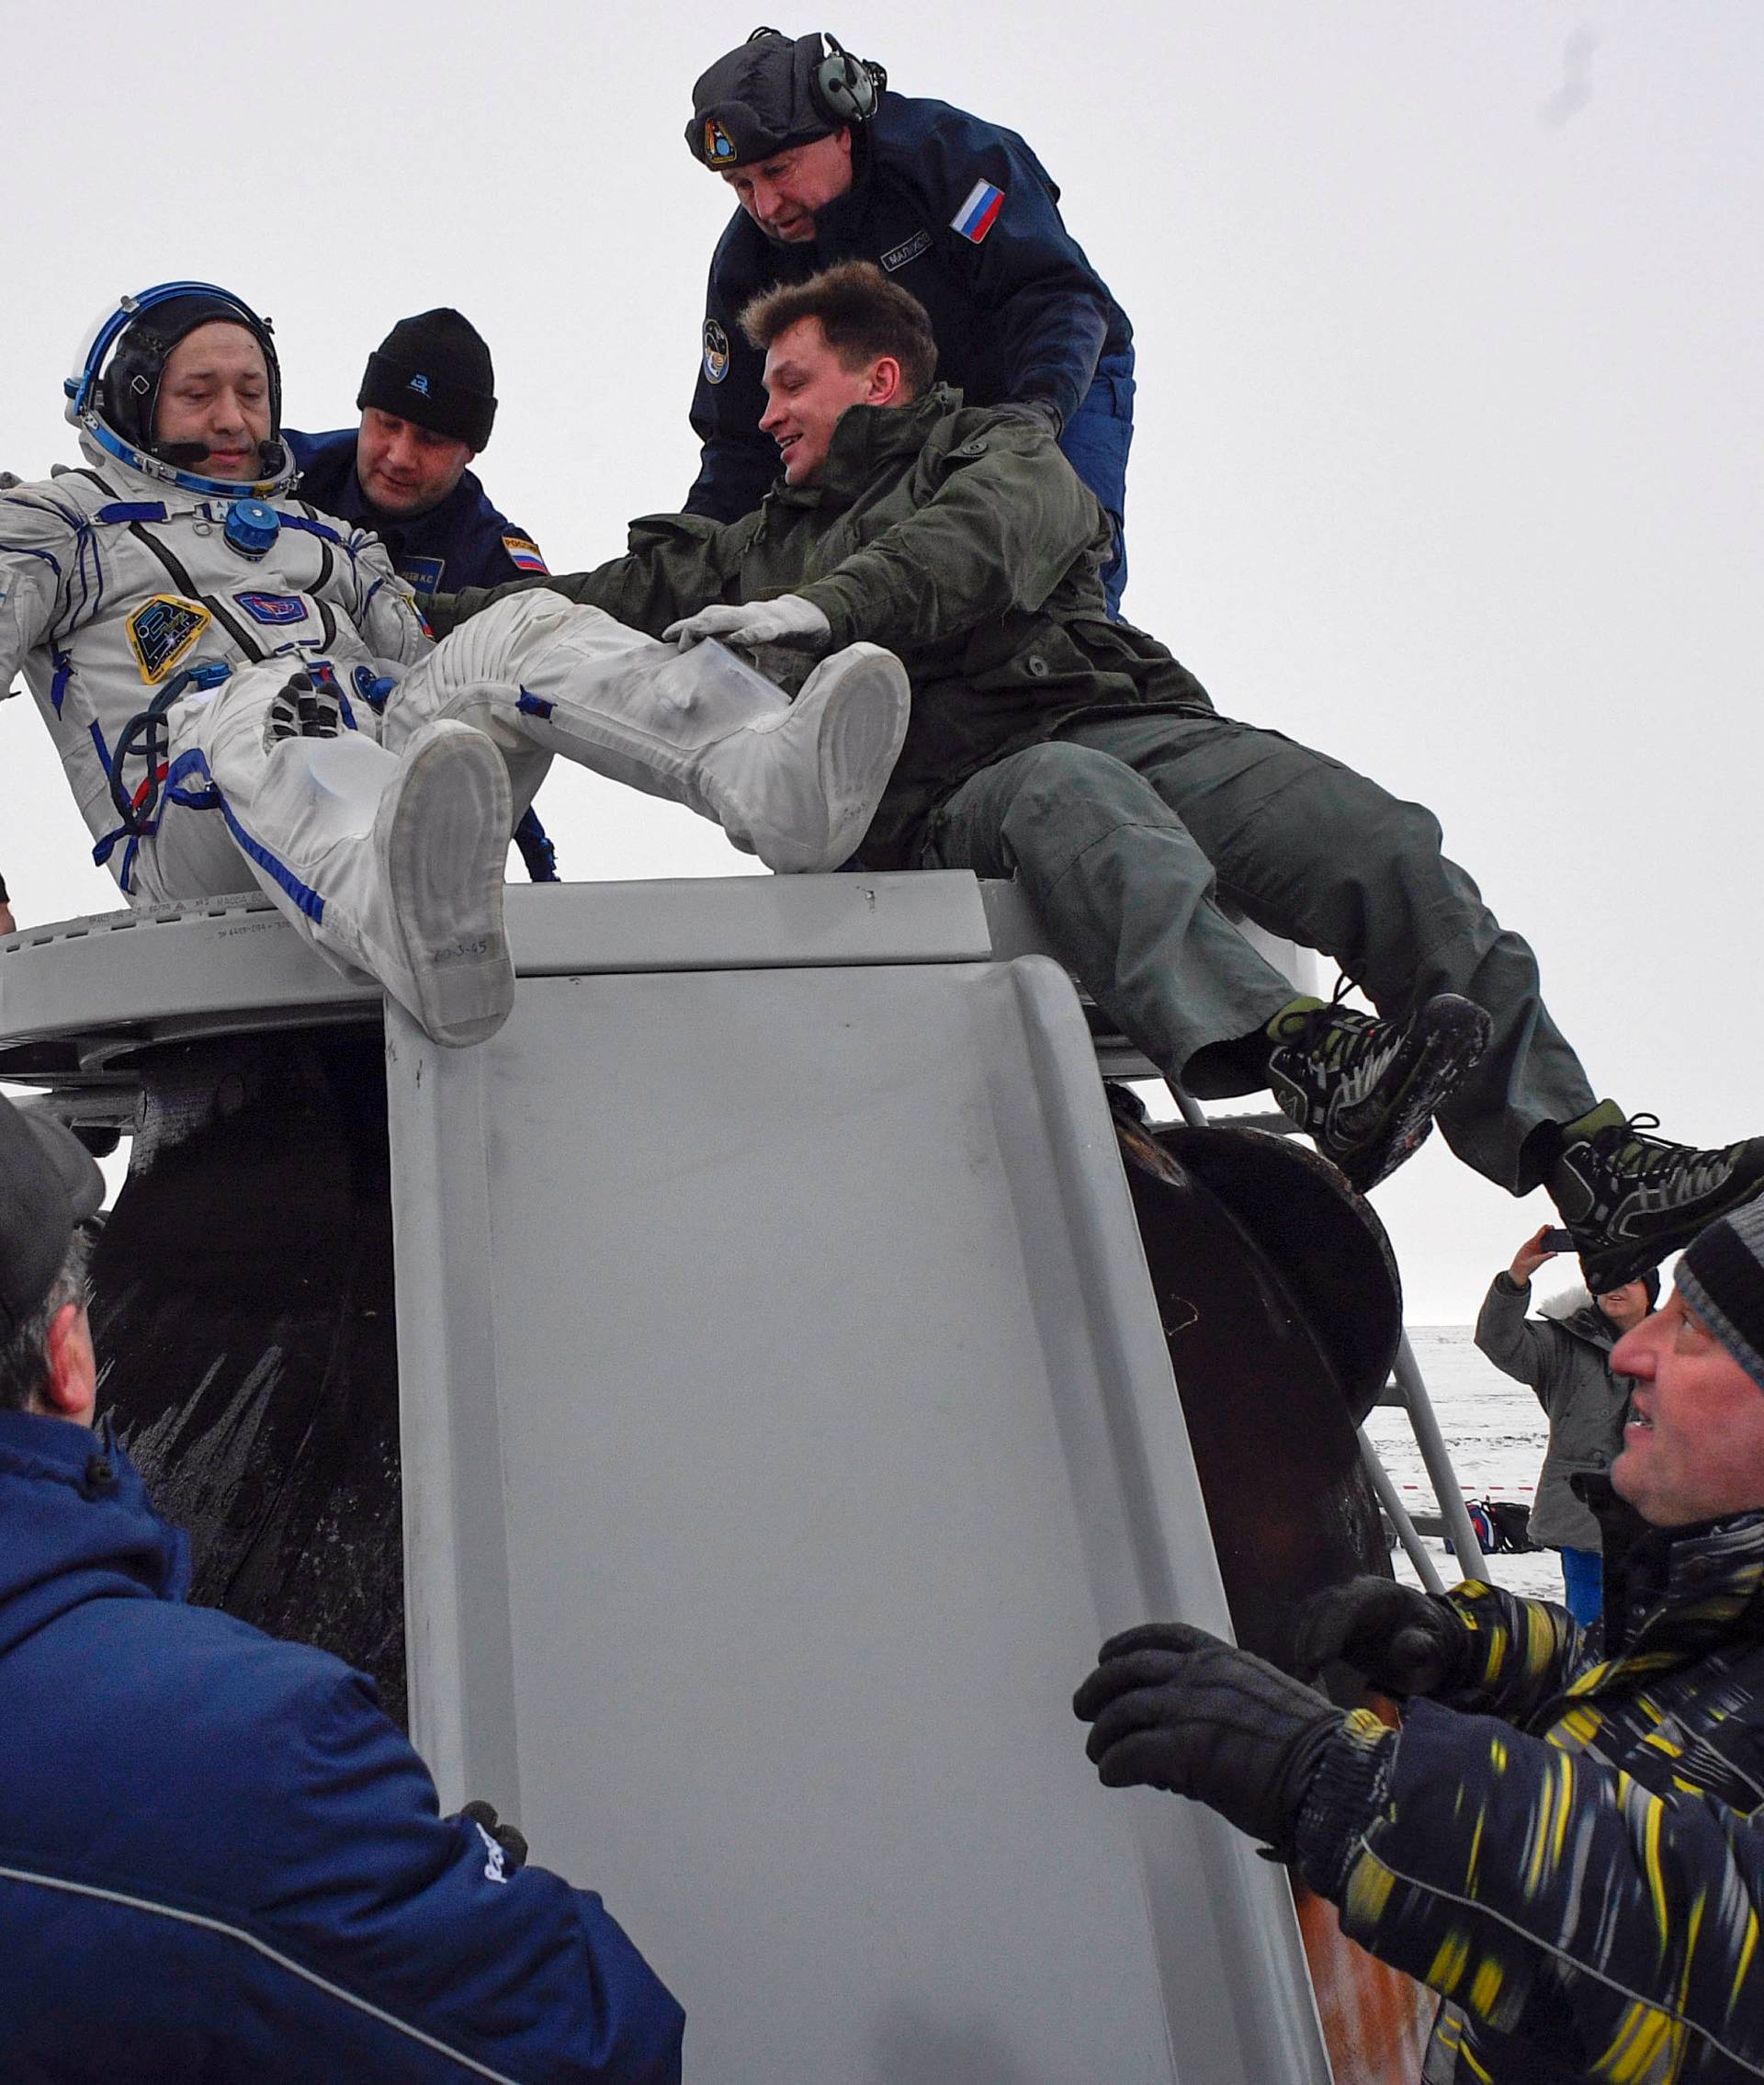 Ground personnel help Alexander Misurkin of Russia to get out of the Soyuz MS-06 space capsule after landing in a remote area outside the town of Dzhezkazgan